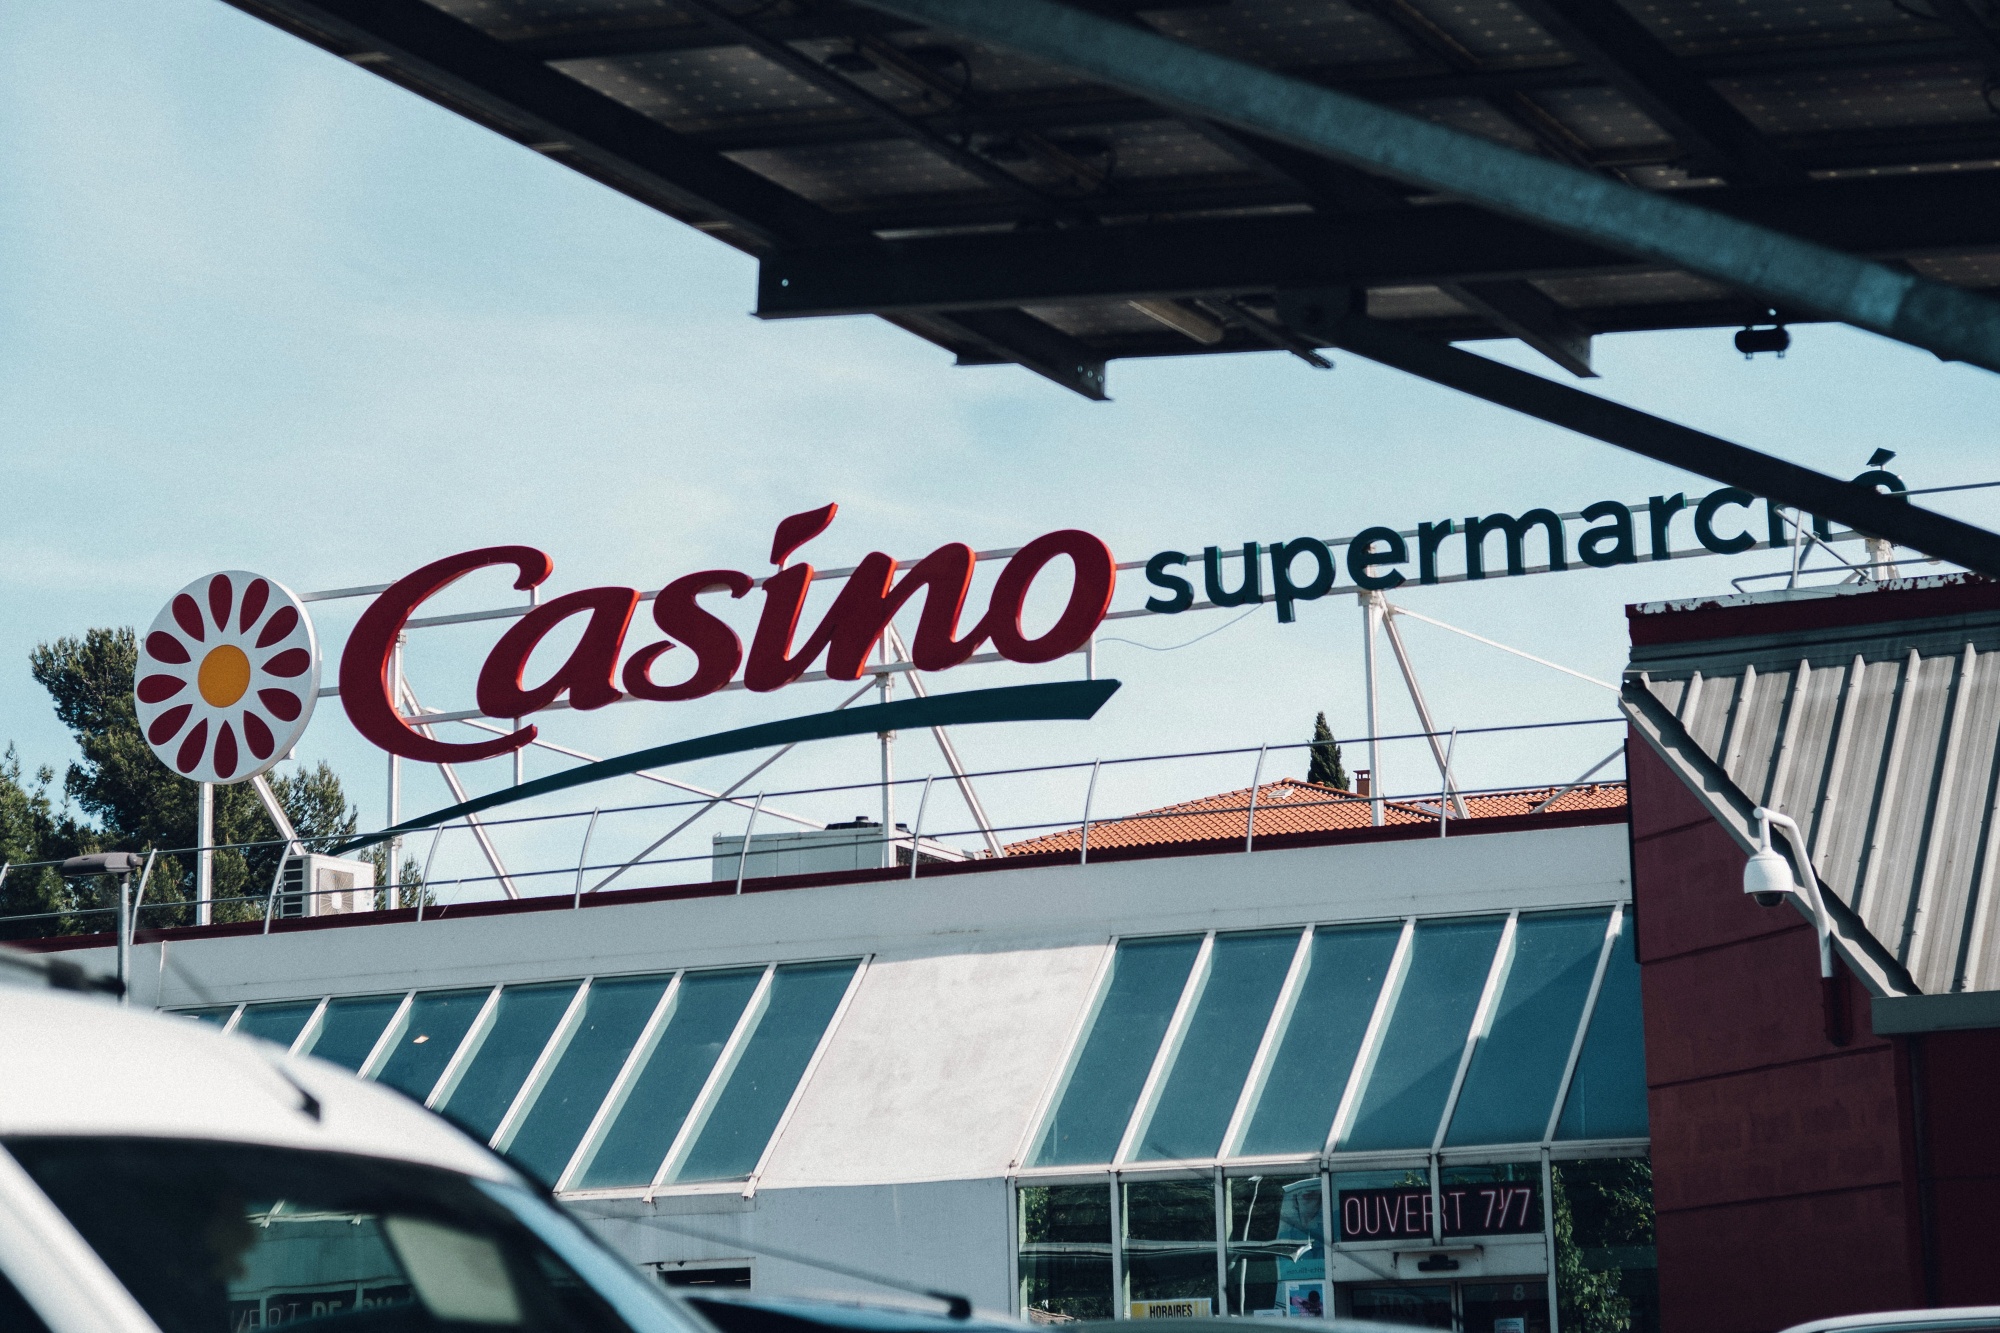 A Casino supermarket, operated by Casino Guichard Perrachon SA, in Marseille, France.